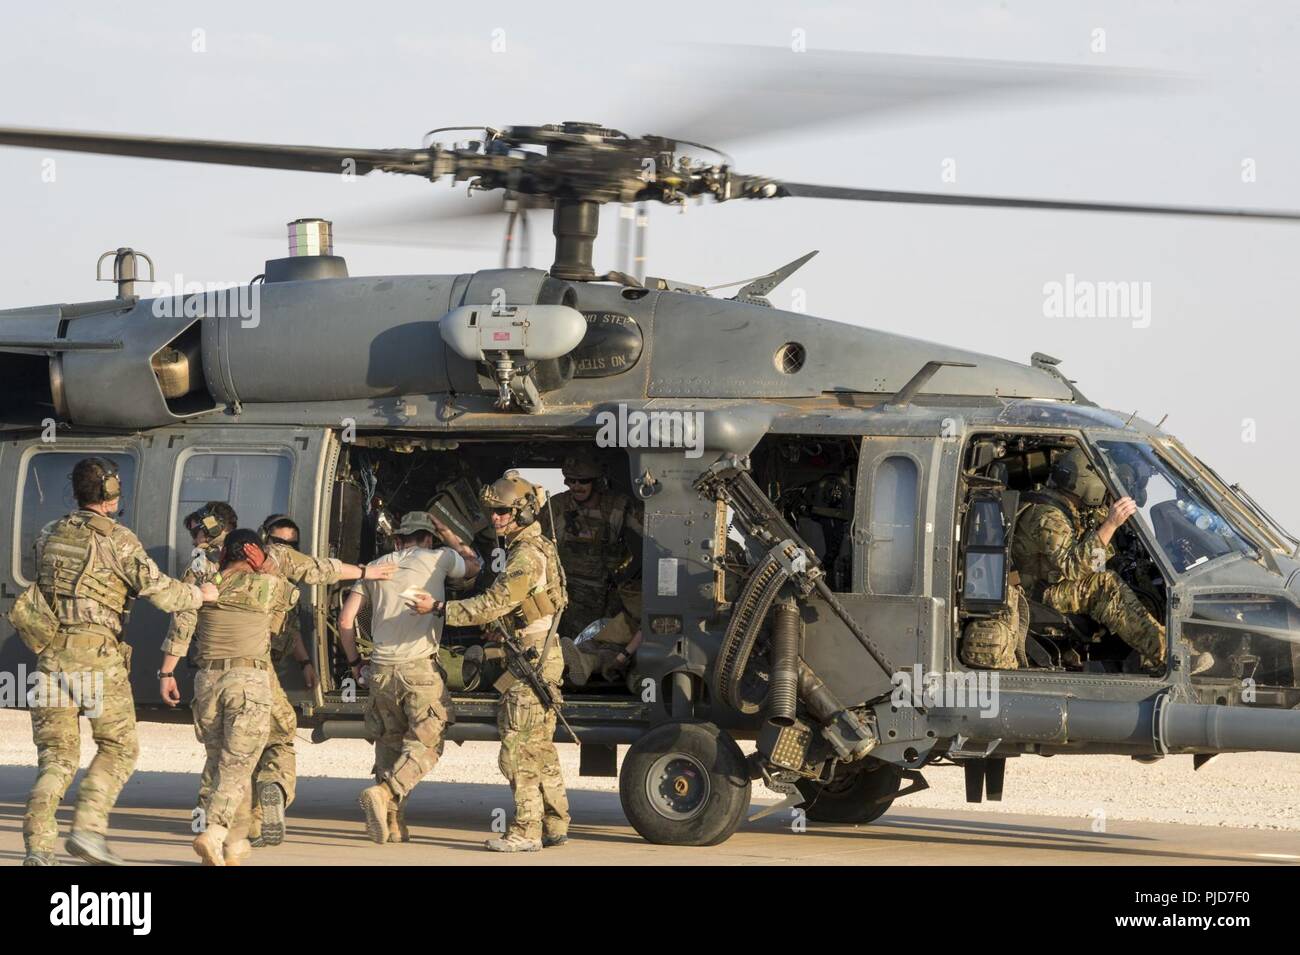 Battlefield Airmen assigned to the 52nd Expeditionary Rescue Squadron transport exercise players to an HH-60 Pave Hawk assigned to the 46th Expeditionary Rescue Squadron after a simulated aircraft crash during a combat search and rescue (CSAR) training exercise at a dirt landing strip in Iraq, July 15, 2018. The CSAR exercise was conducted to help validate required training to perform mission taskings and utilization of the various assets on a large scale. Battlefield Airmen assigned throughout the combined joint operational area conduct operations in support of Combined Joint Task Force - Ope Stock Photo